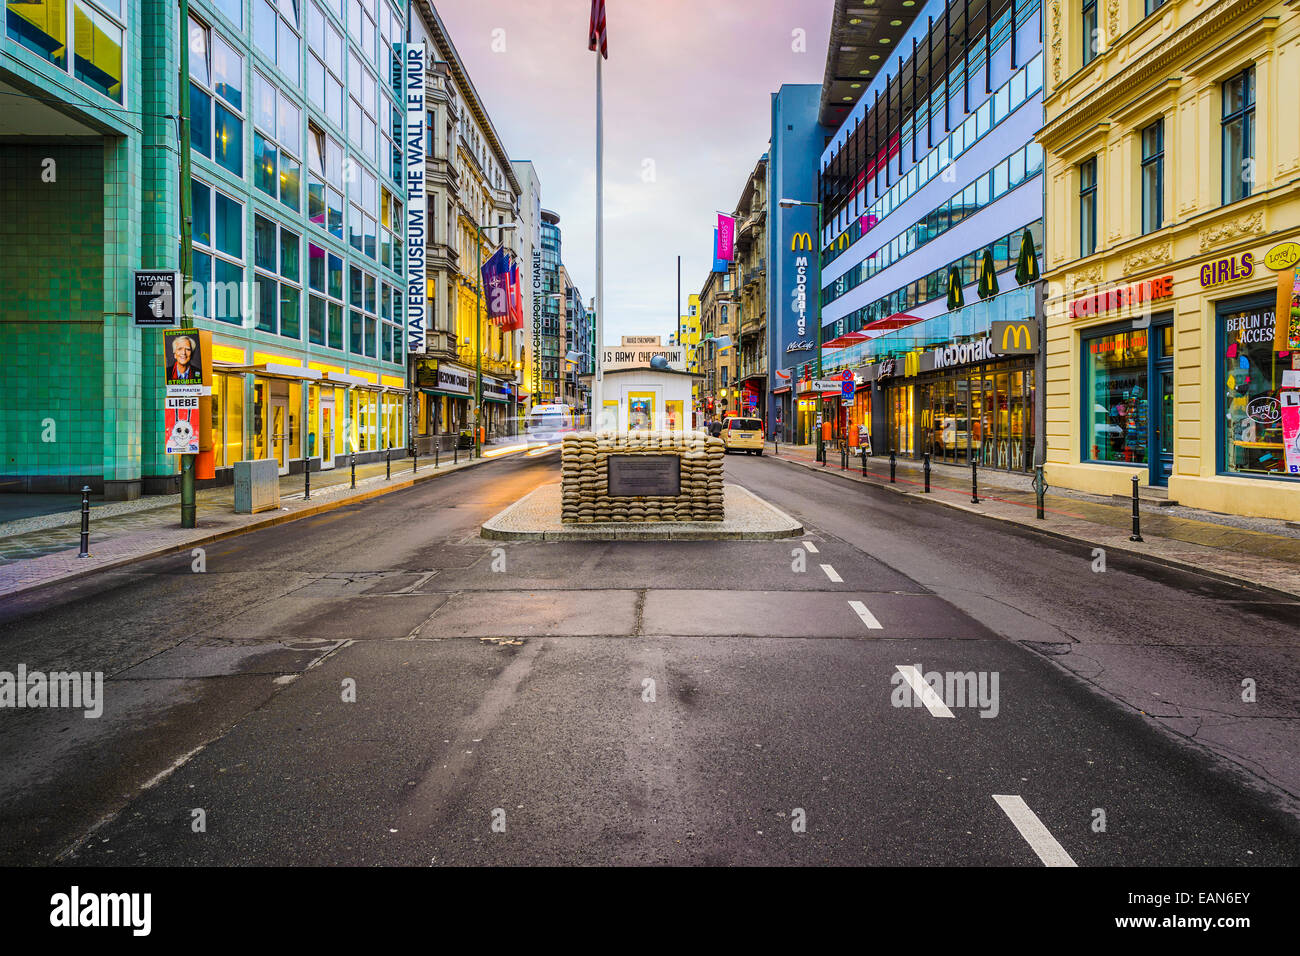 Checkpoint Charlie in Berlin, Germany. Stock Photo